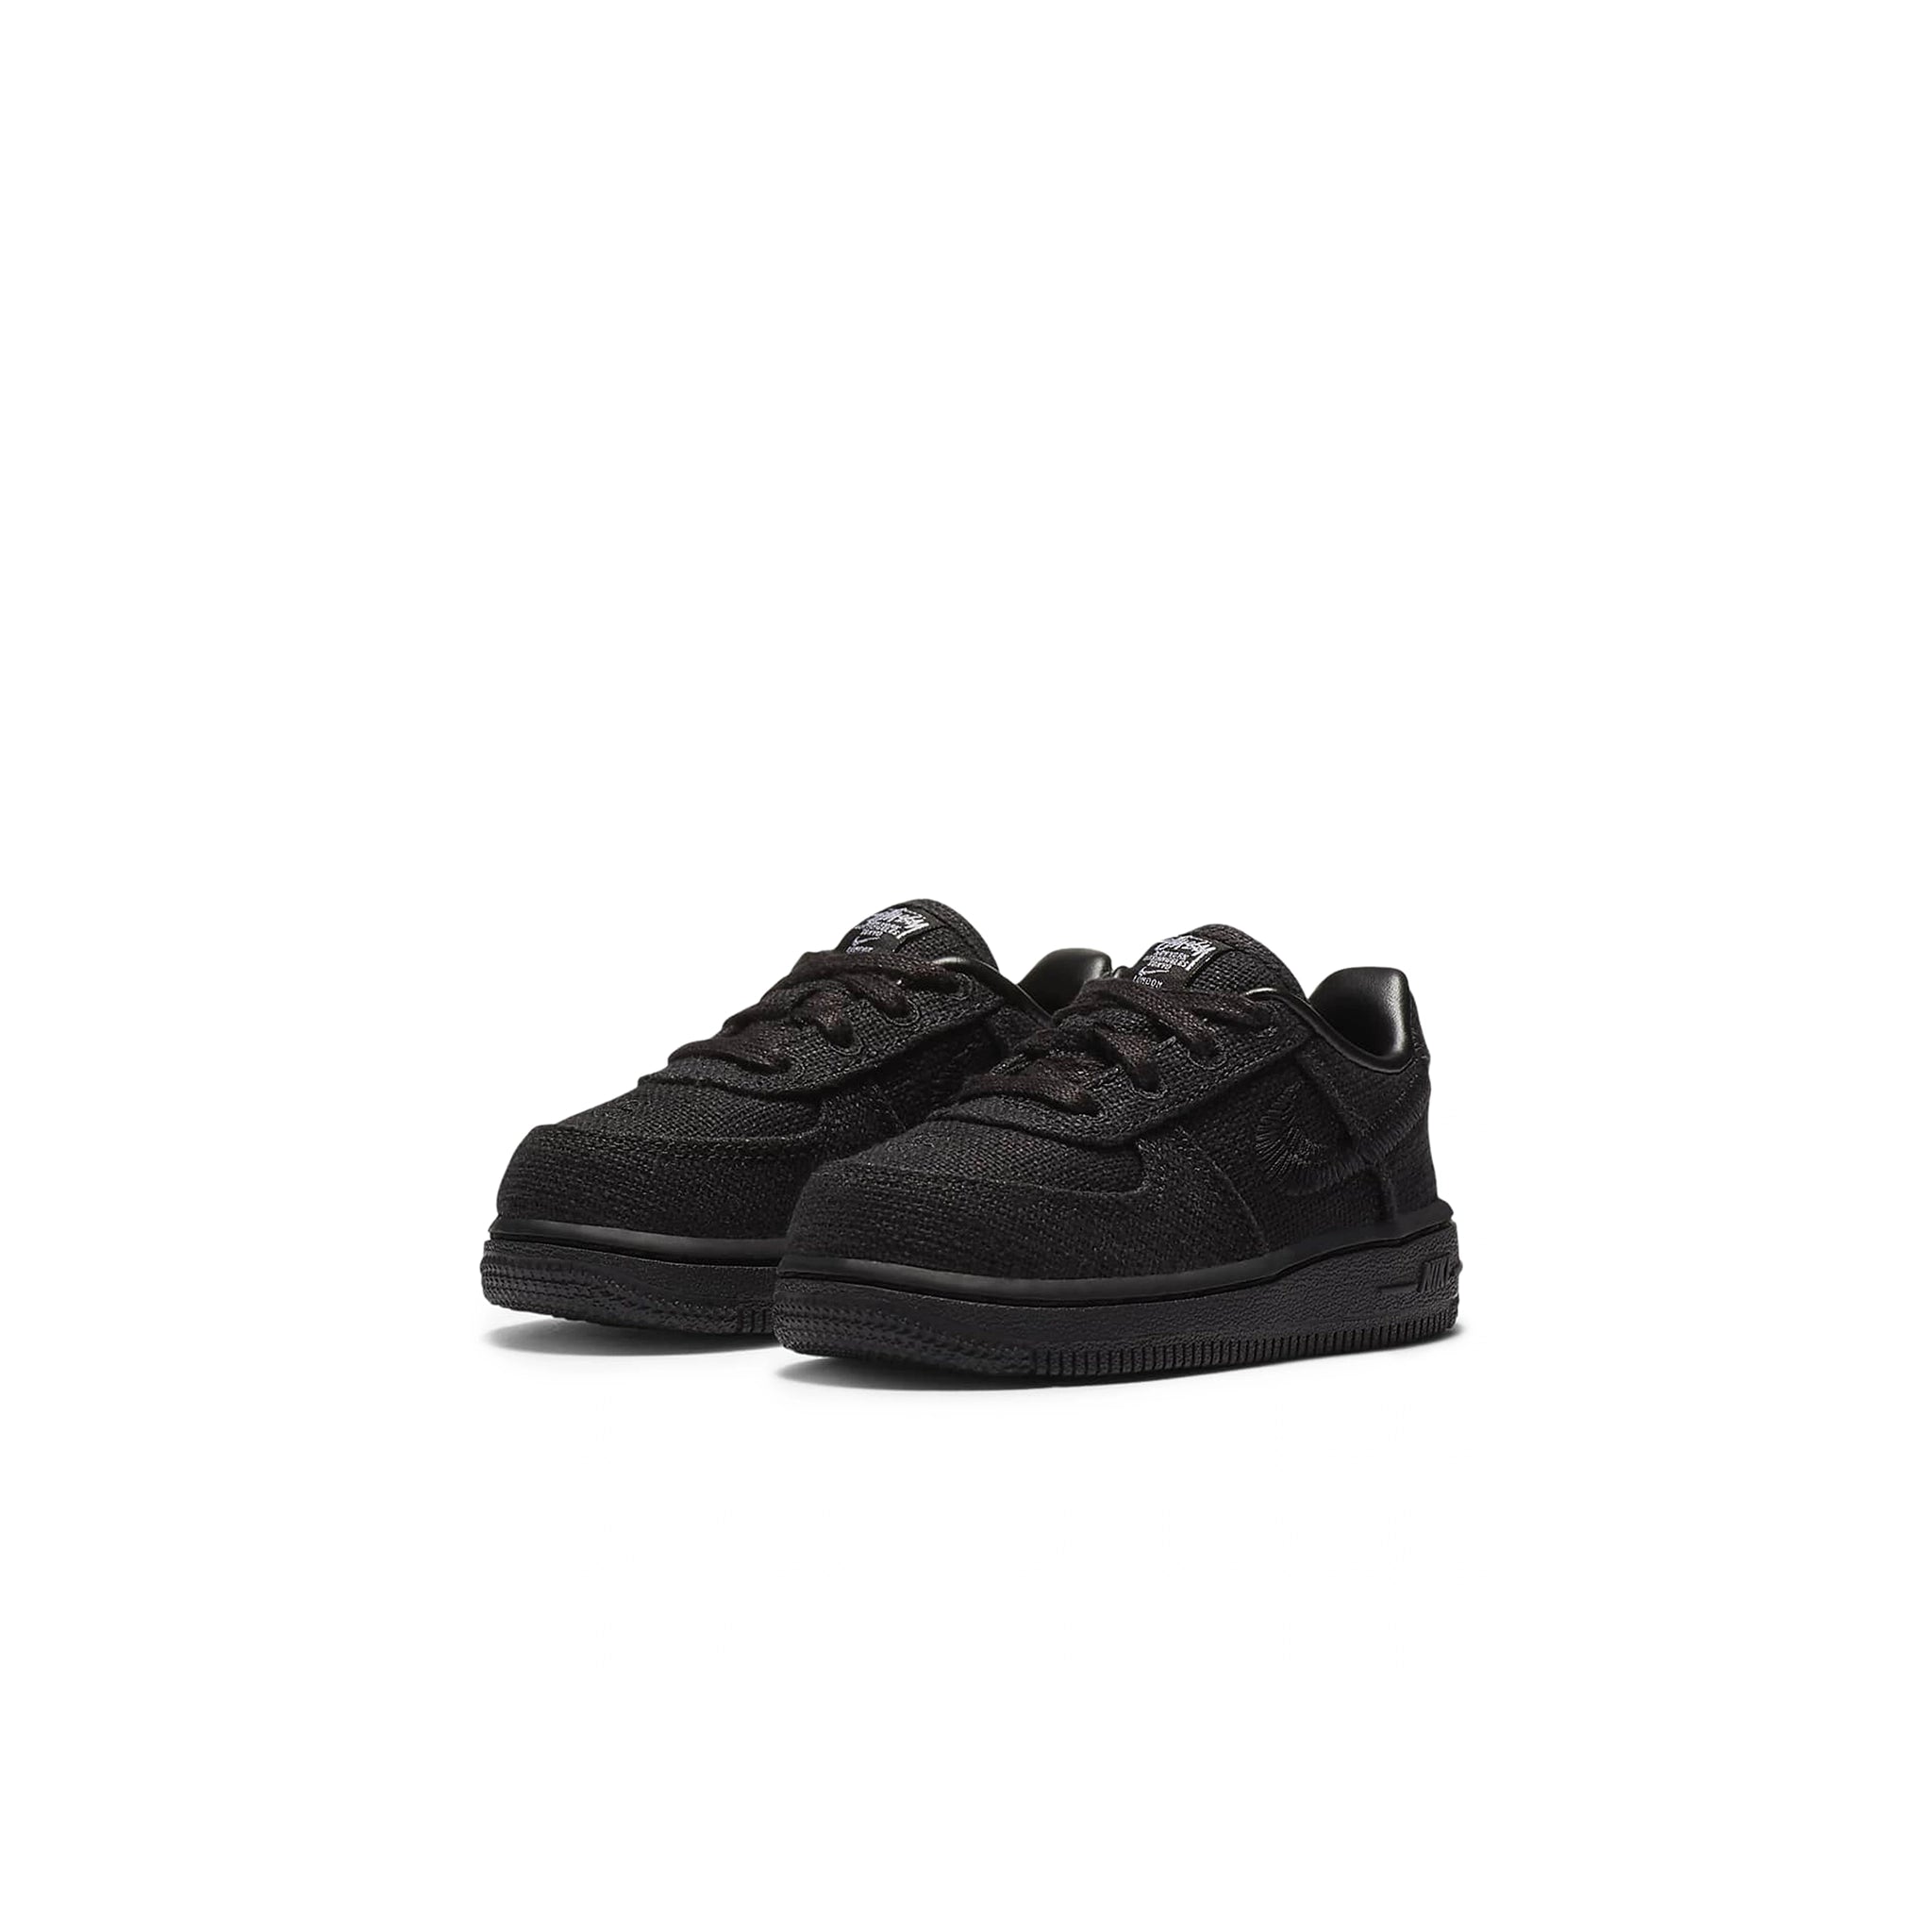 Front side view of Stussy x Nike Air Force 1 Low Black (TD) DC8306-001